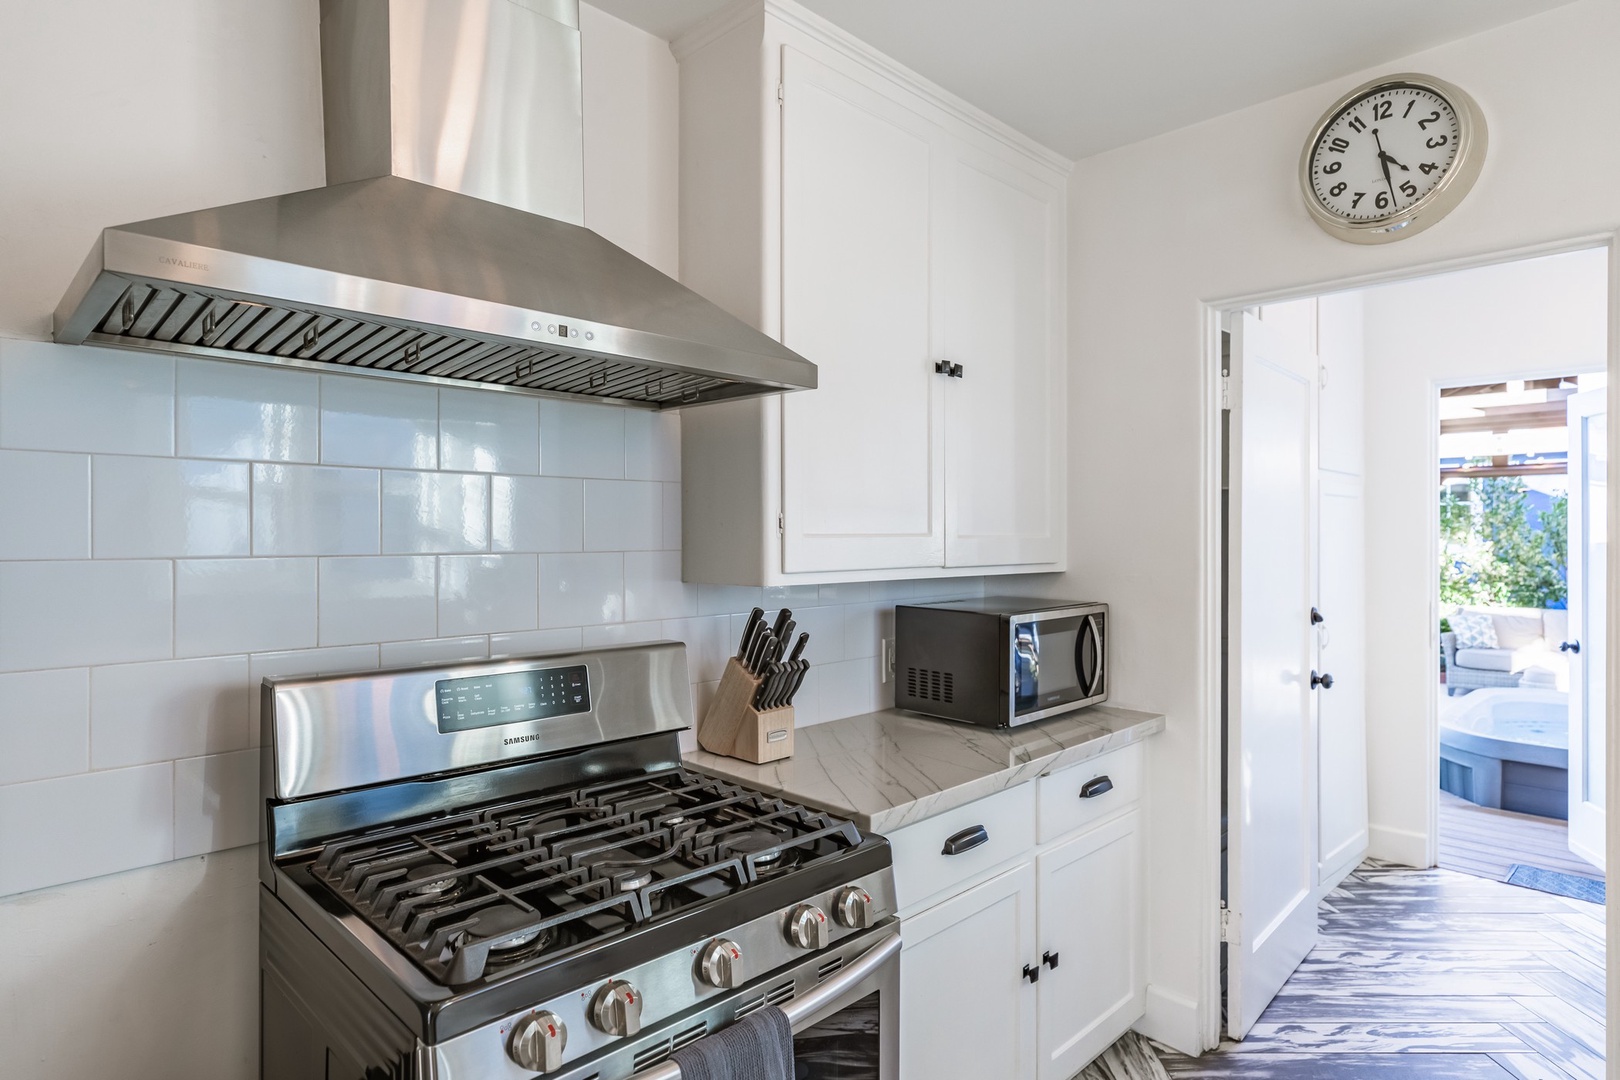 Stainless appliances package